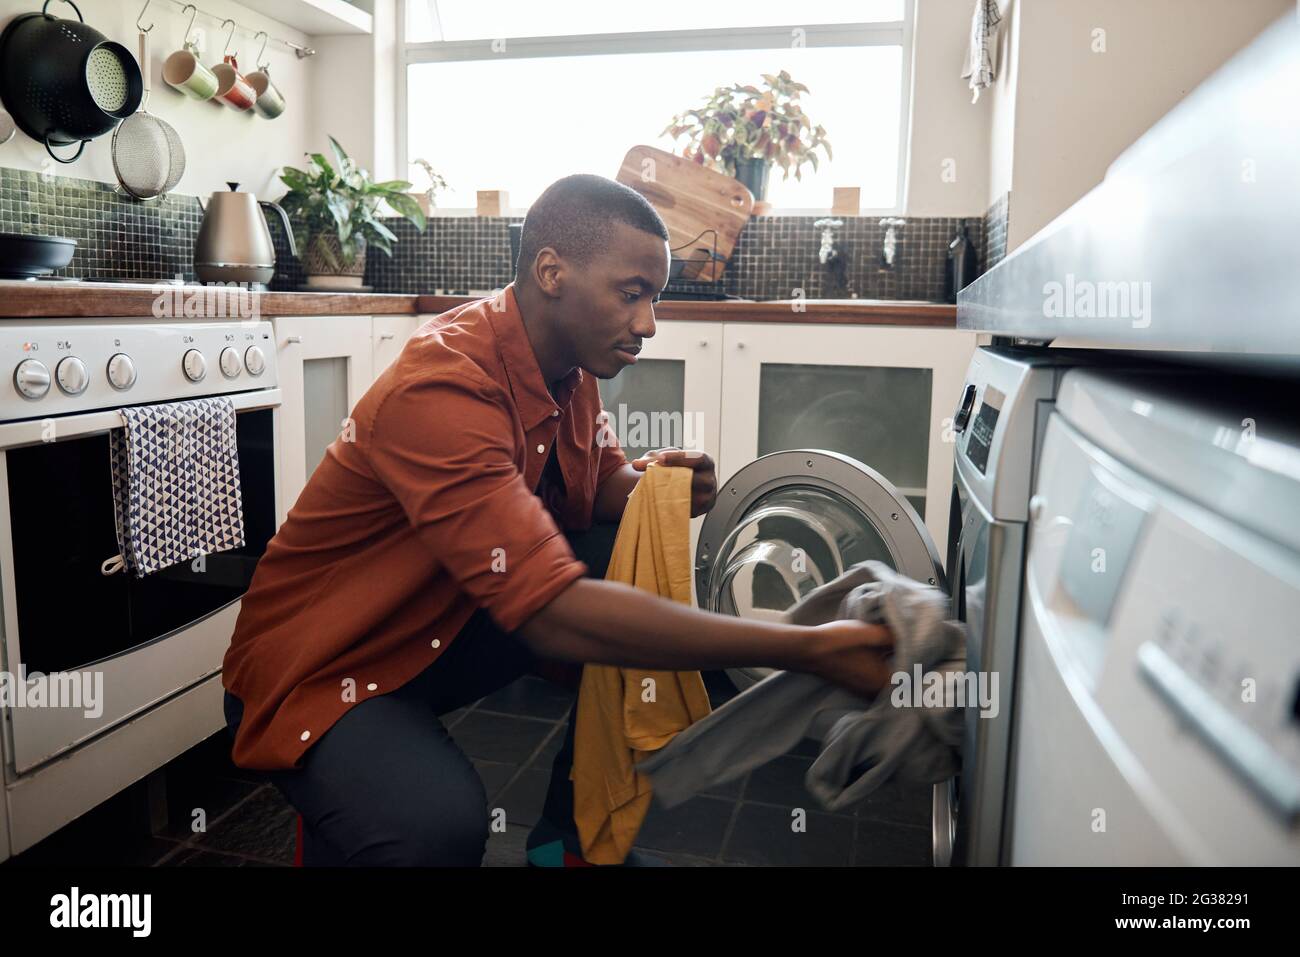 Young African man putting clothes in a washing machine at home Stock Photo